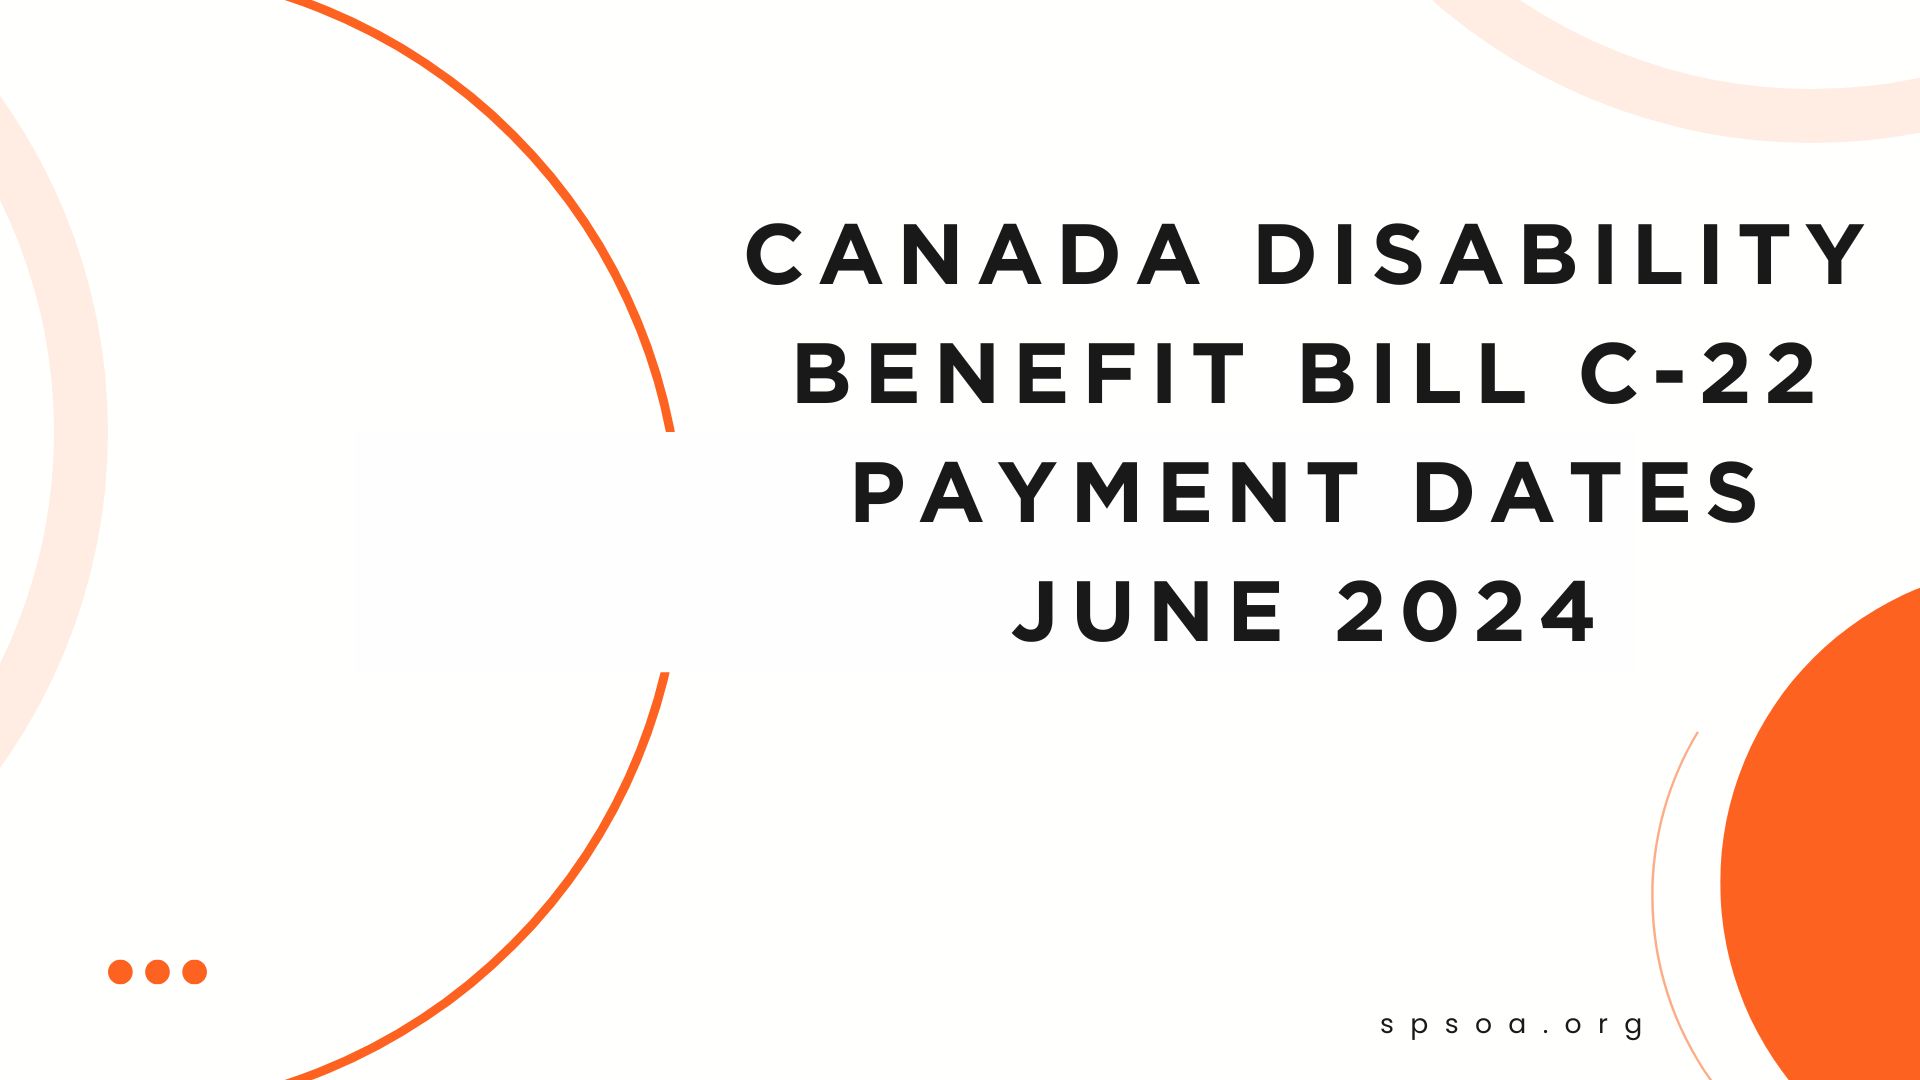 Canada Disability Benefit Bill C-22 Payment Dates June 2024